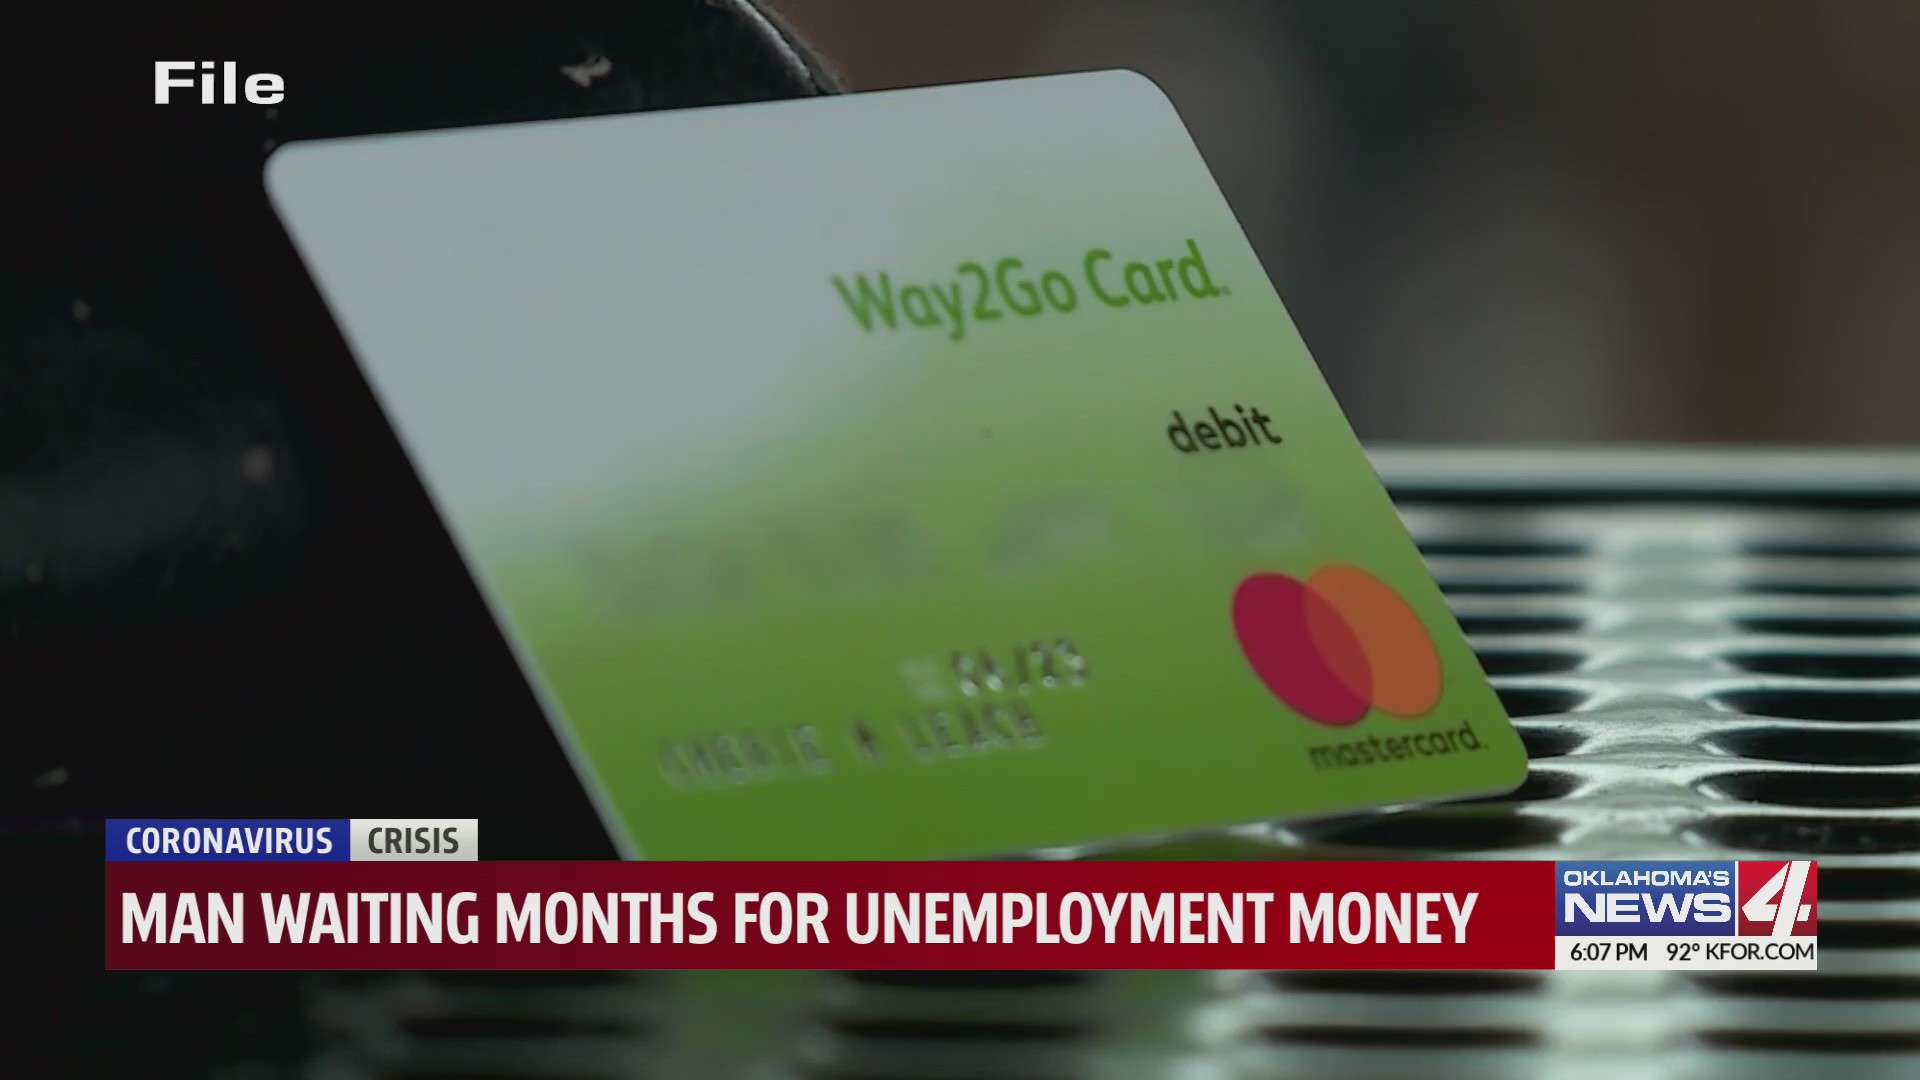 Oklahoma Unemployment Debit Card / Some Complain They Have ...